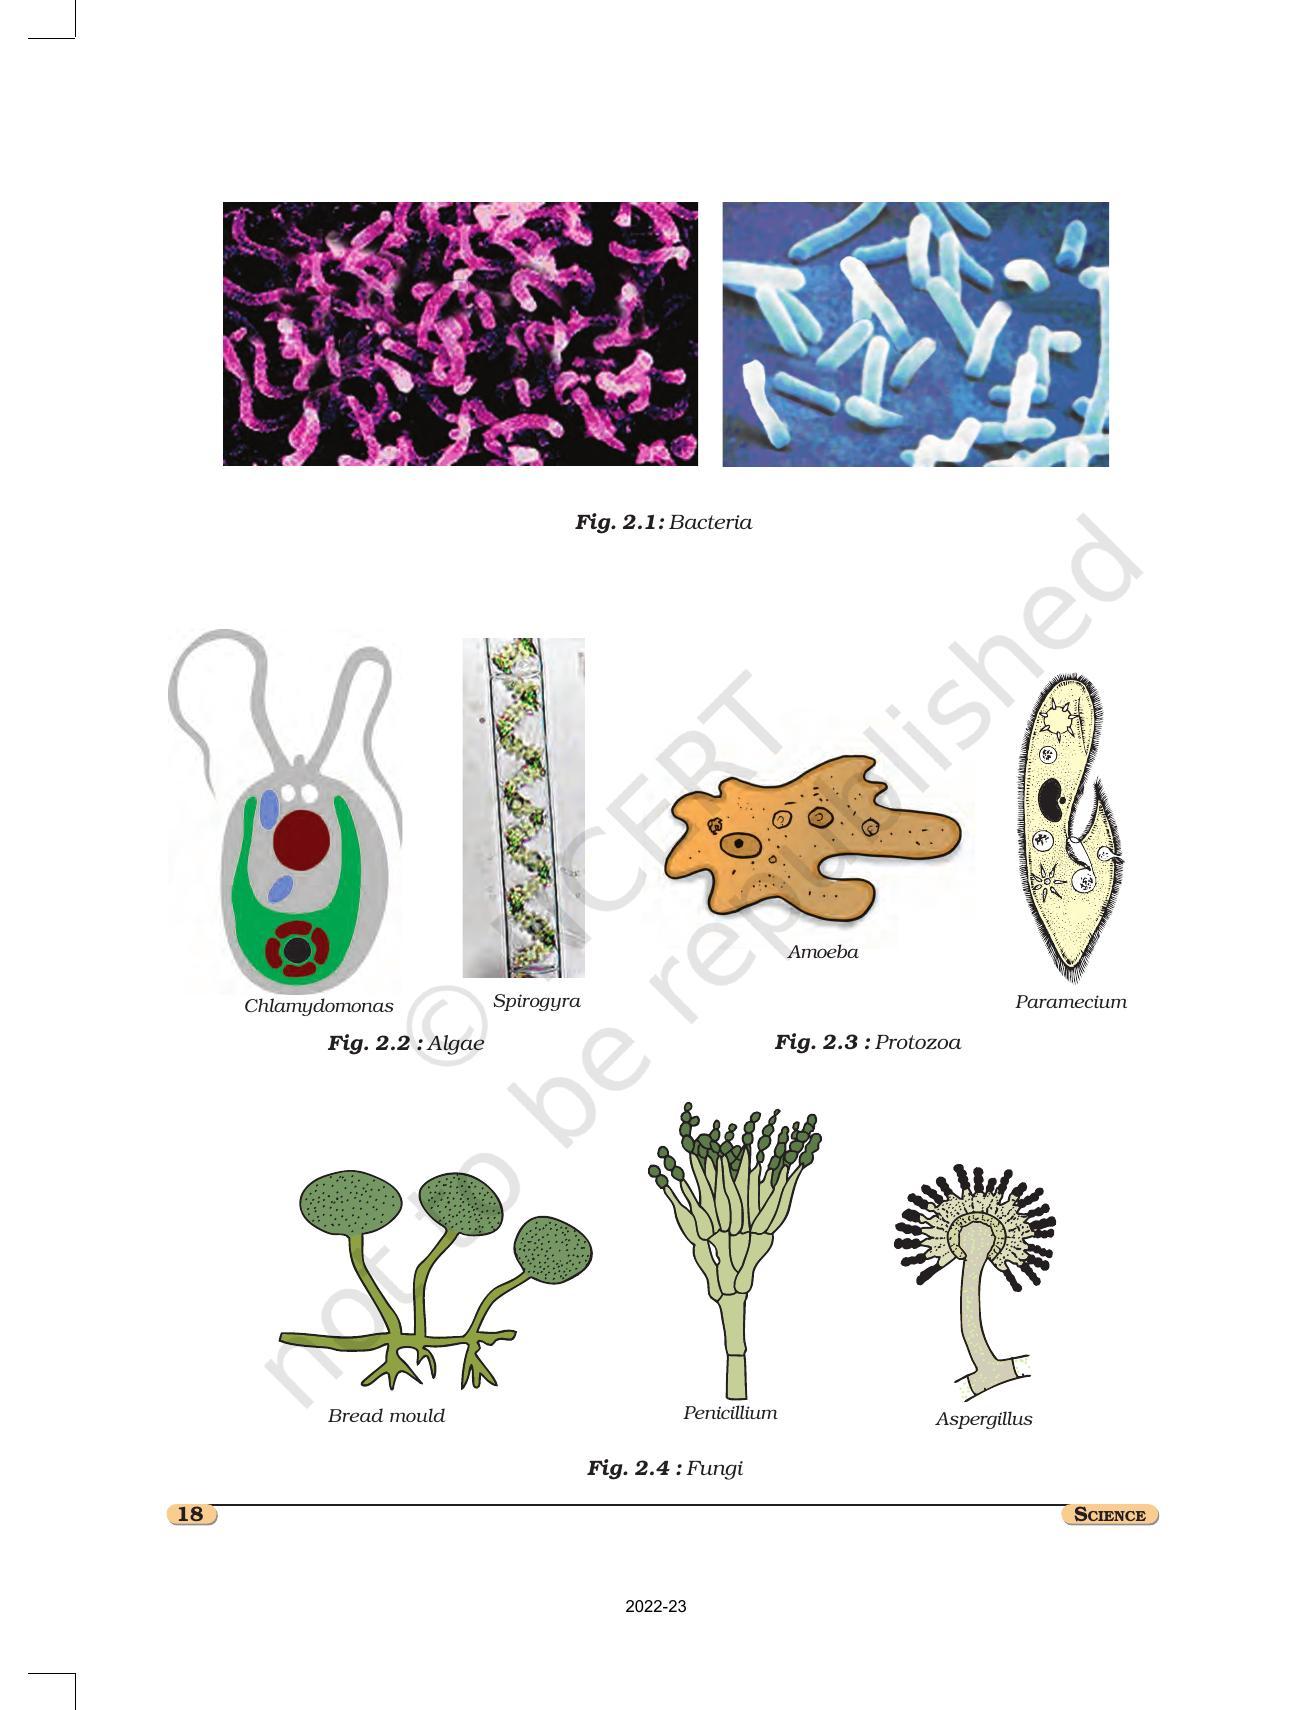 NCERT Book for Class 8 Science Chapter 2 Microorganisms: Friend and Foe - Page 2